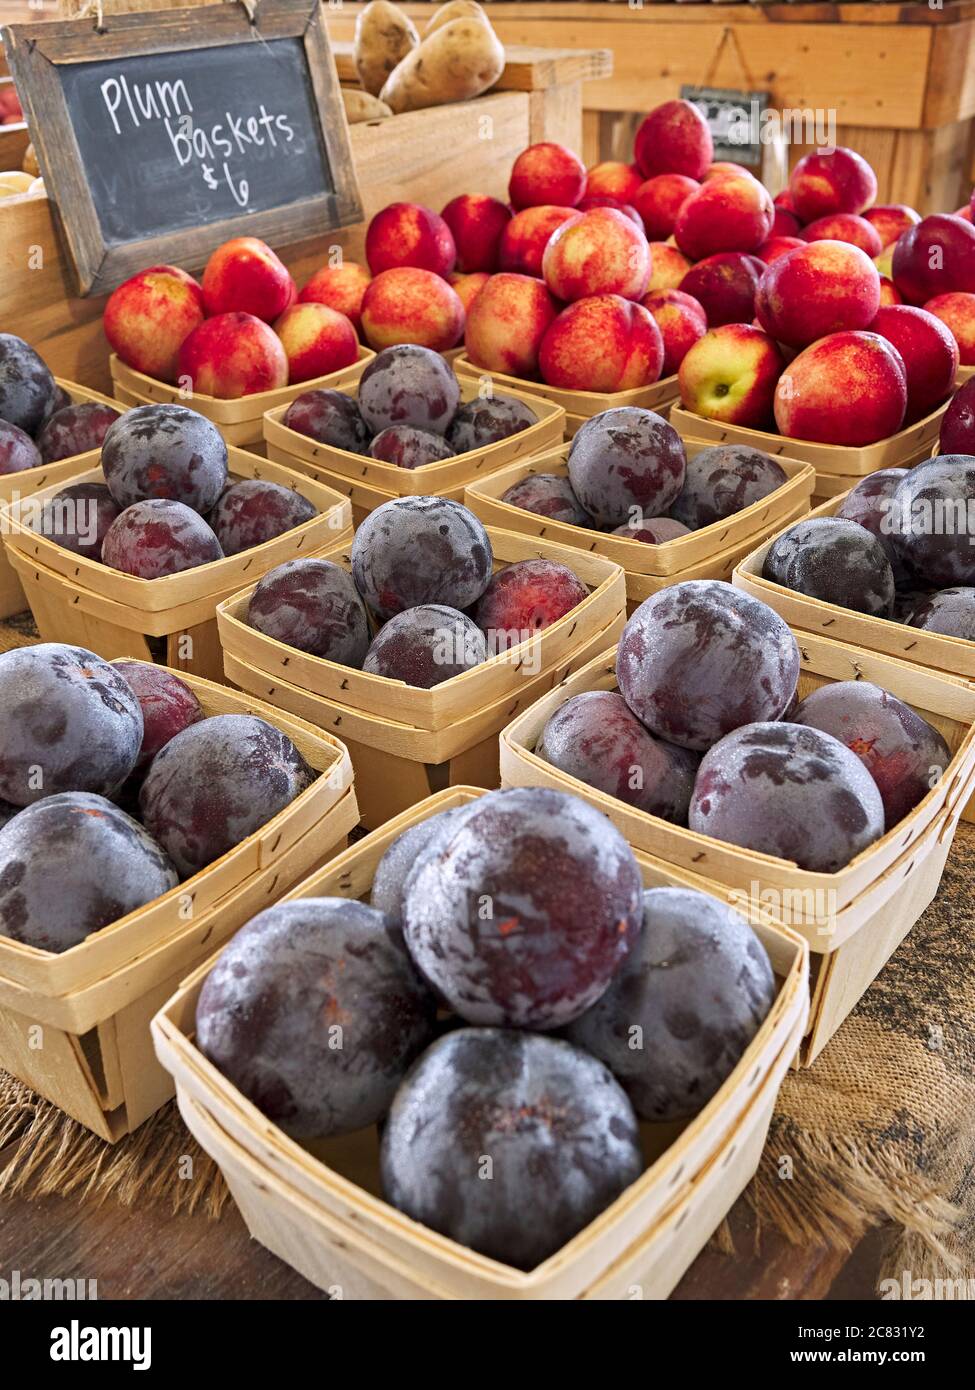 Plums, apples and other fresh fruit on display at a farm or farmers market. Stock Photo